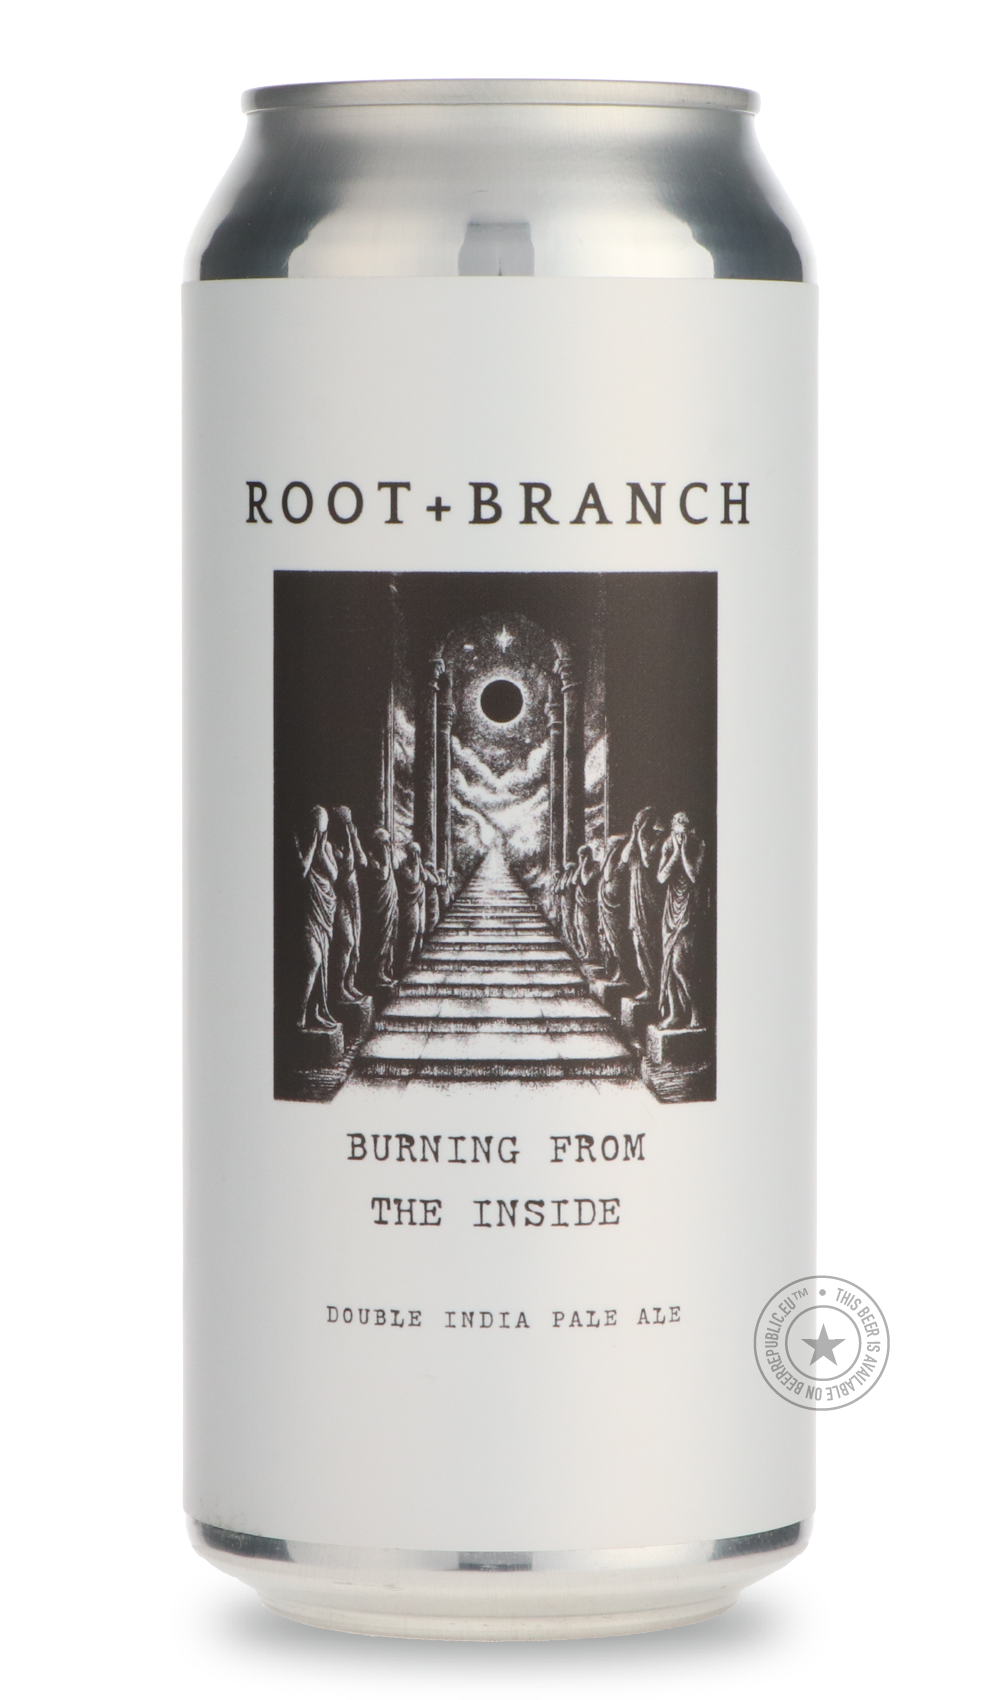 -Root + Branch- Burning From the Inside-IPA- Only @ Beer Republic - The best online beer store for American & Canadian craft beer - Buy beer online from the USA and Canada - Bier online kopen - Amerikaans bier kopen - Craft beer store - Craft beer kopen - Amerikanisch bier kaufen - Bier online kaufen - Acheter biere online - IPA - Stout - Porter - New England IPA - Hazy IPA - Imperial Stout - Barrel Aged - Barrel Aged Imperial Stout - Brown - Dark beer - Blond - Blonde - Pilsner - Lager - Wheat - Weizen - A